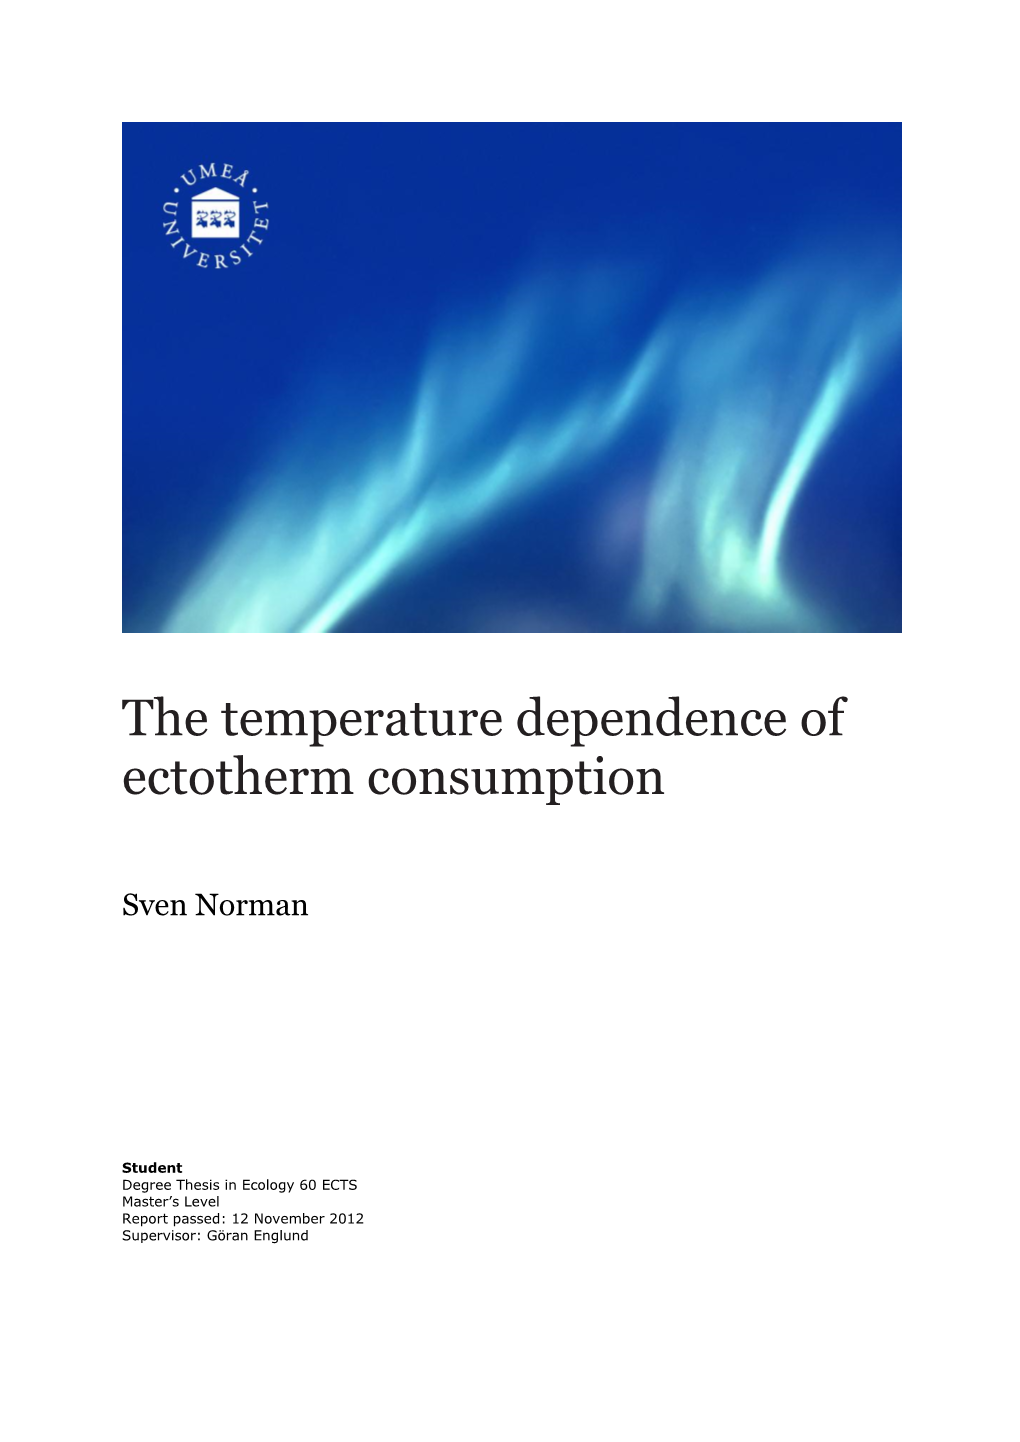 The Temperature Dependence of Ectotherm Consumption